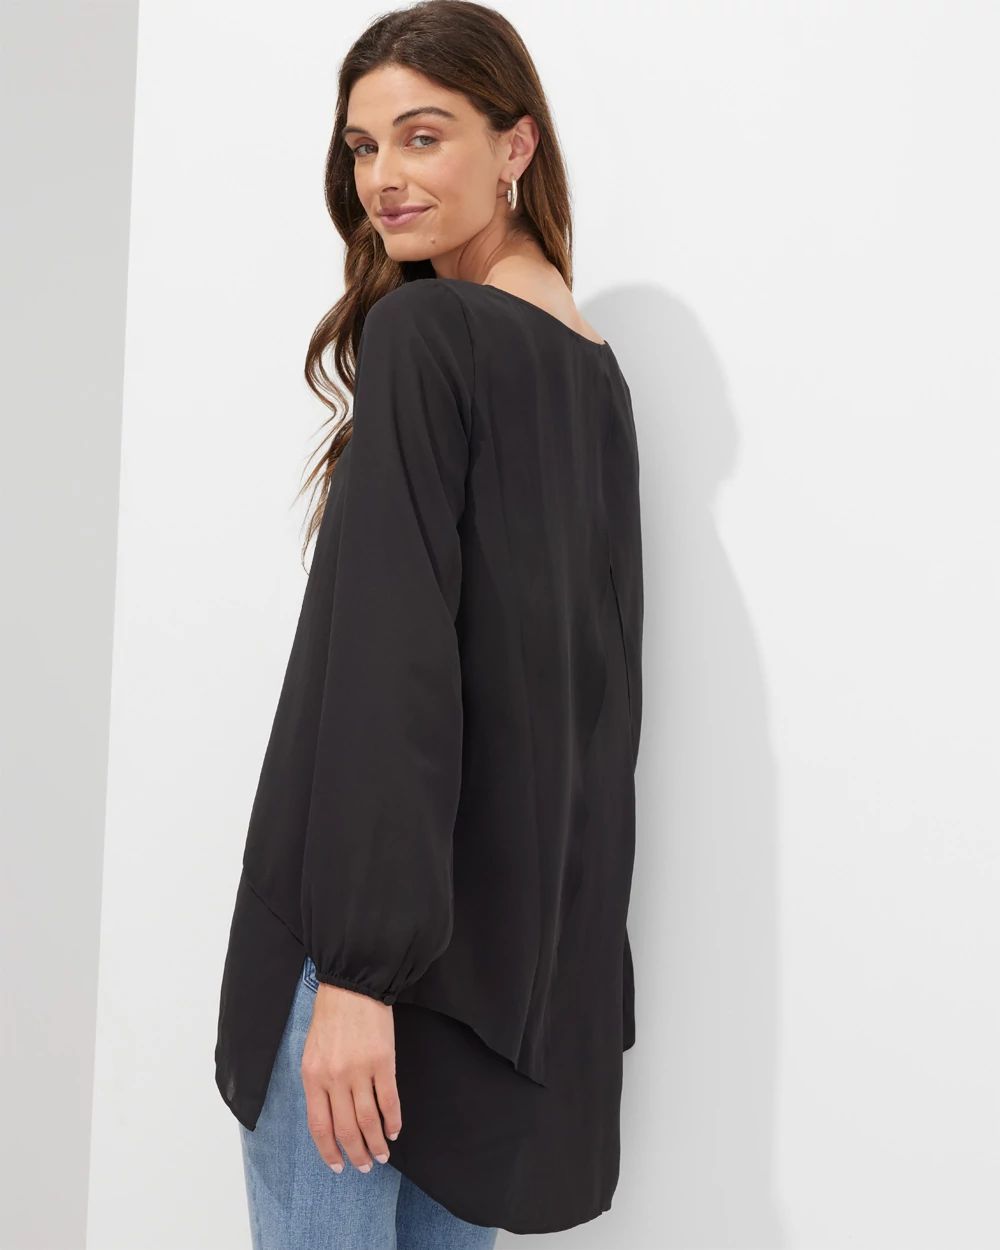 Outlet WHBM Tiered Hem Tunic click to view larger image.